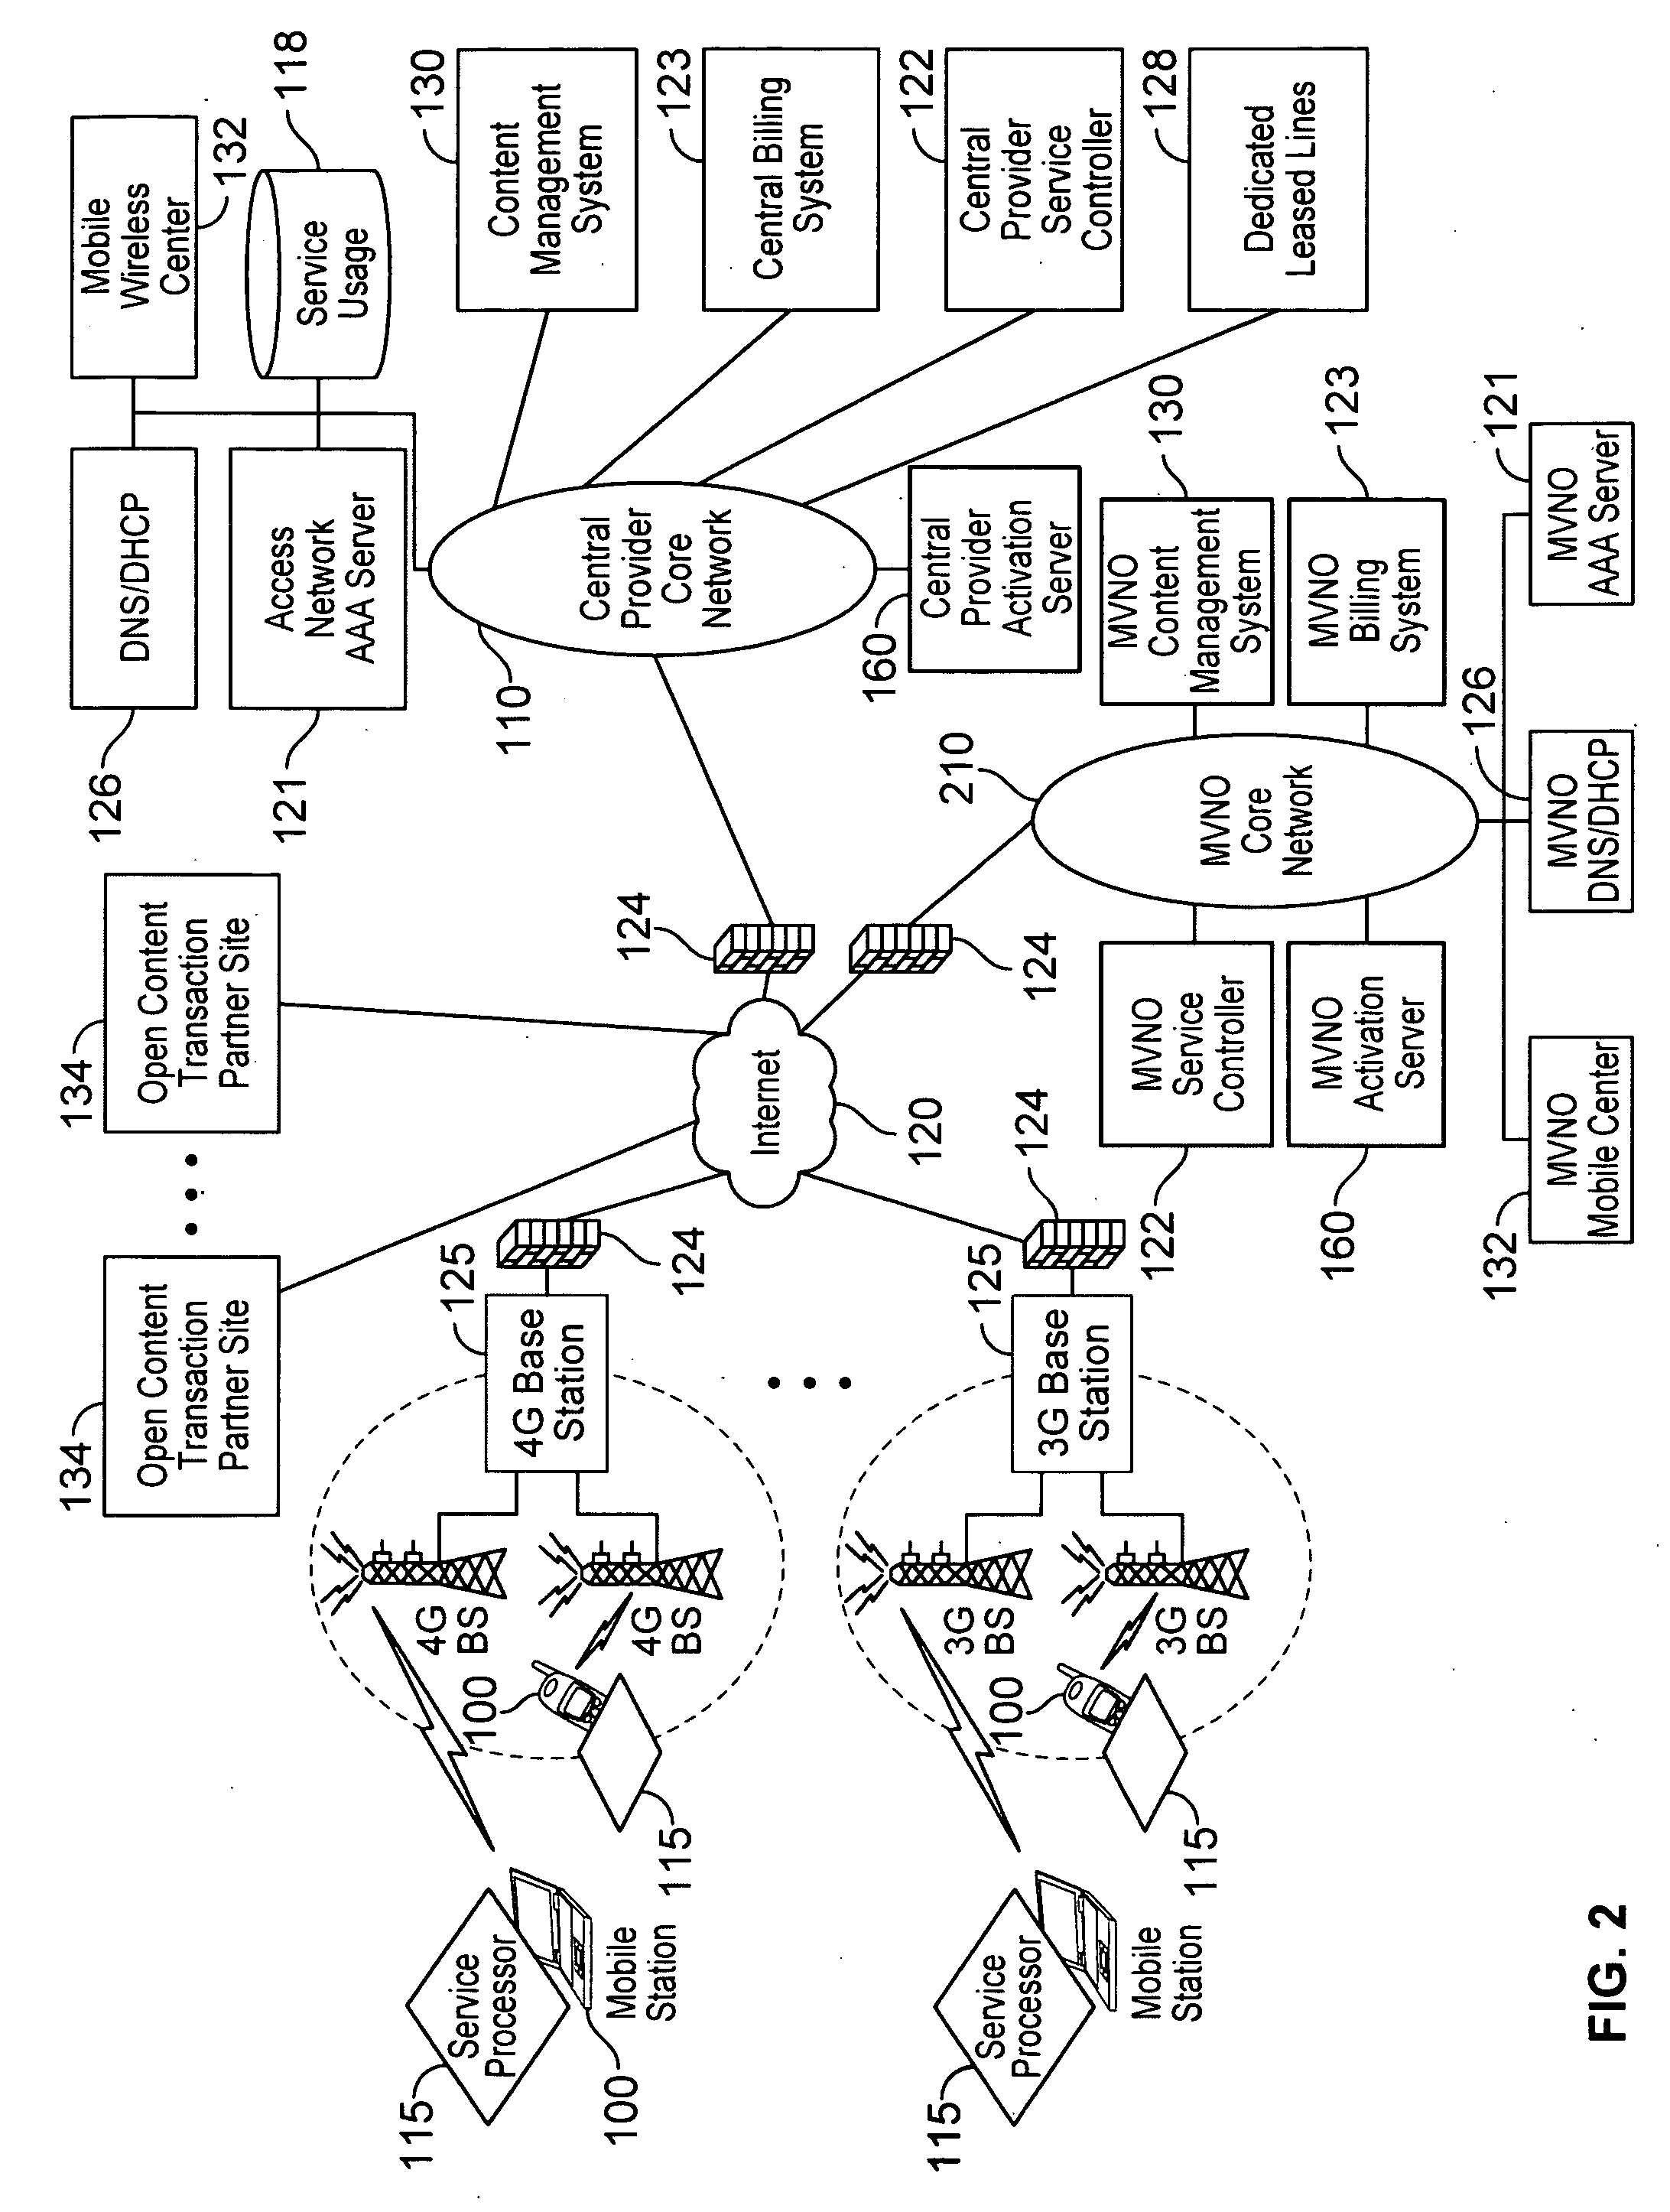 Verifiable device assisted service usage monitoring with reporting, synchronization, and notification